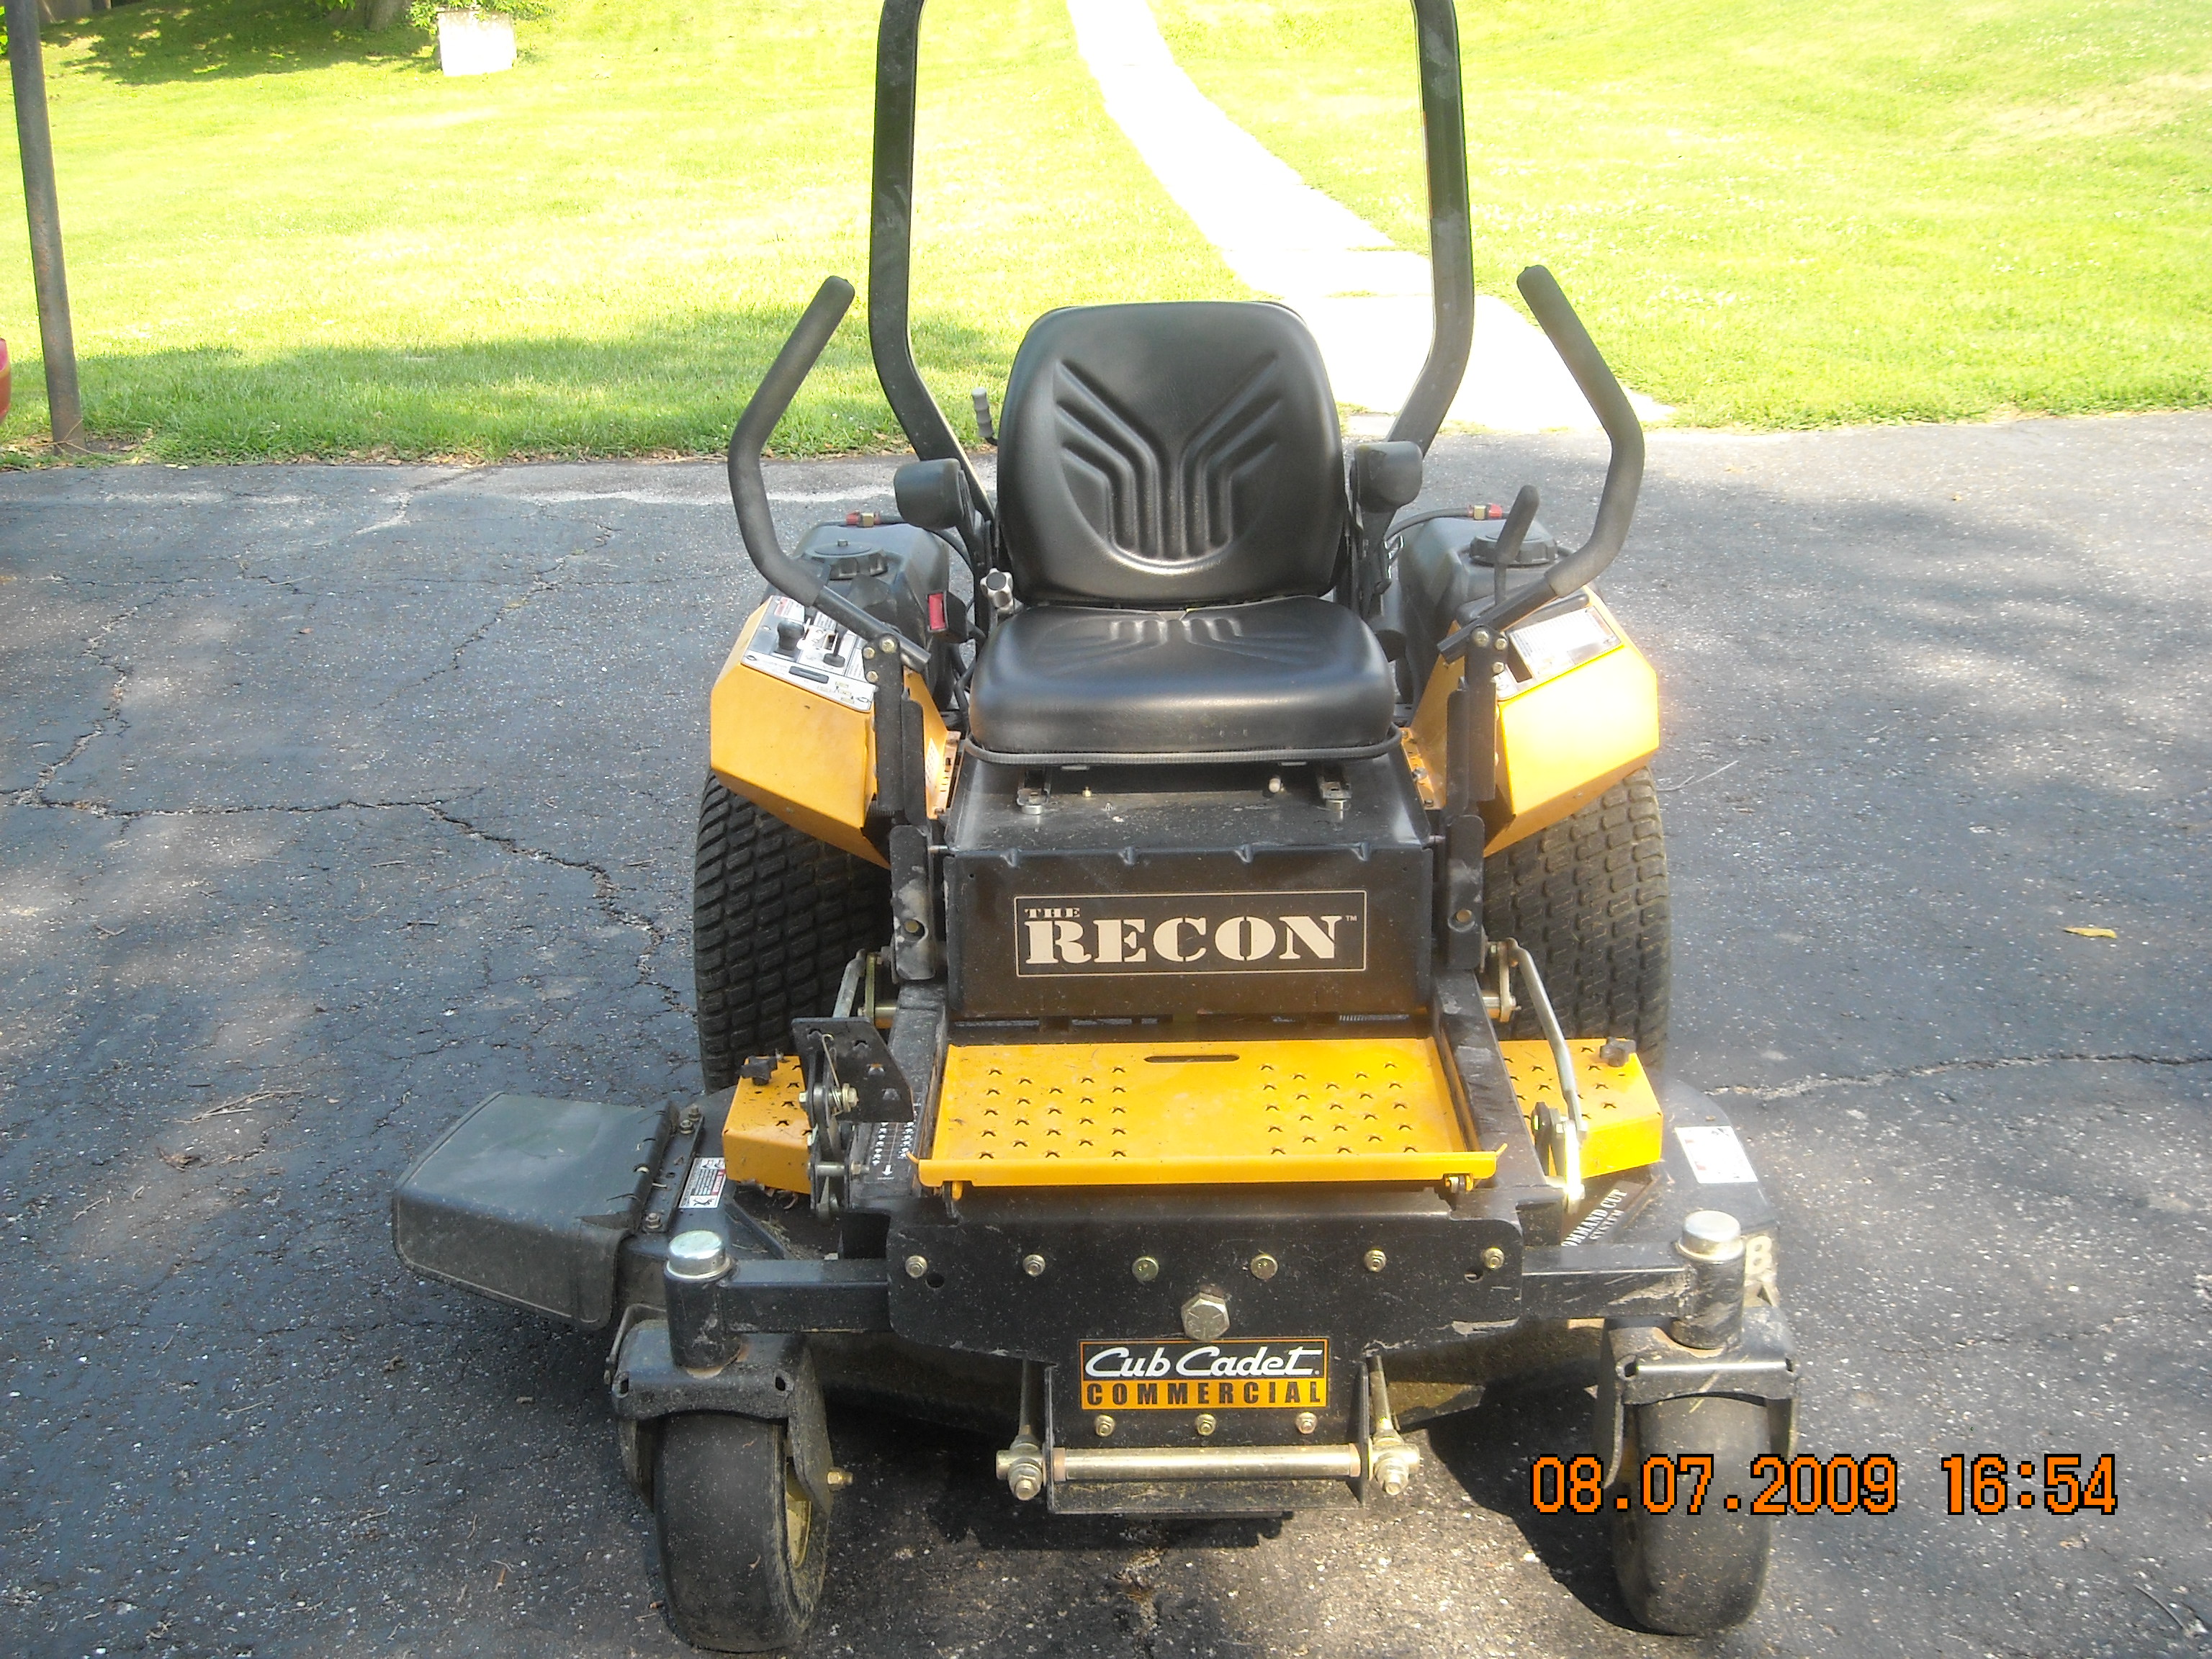 2008 Cub Cadet Recon Commercial ZTR, 23 Hp Kohler engine with less ...